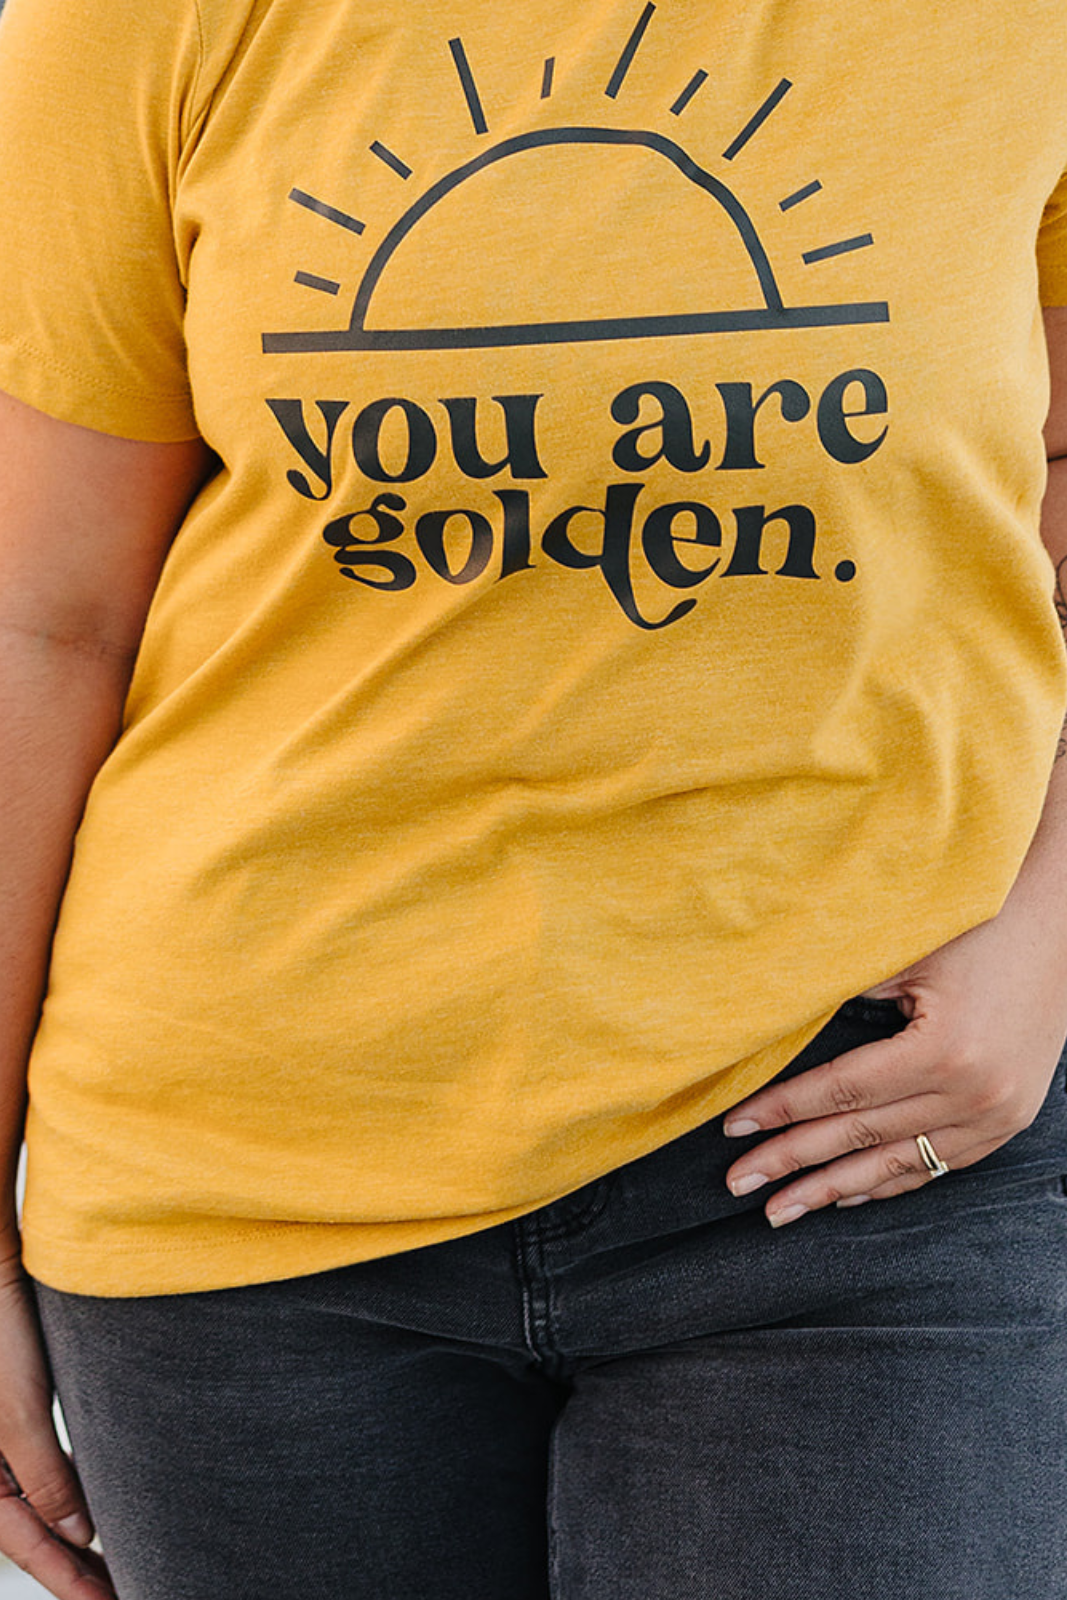 You Are Golden Women's Tee